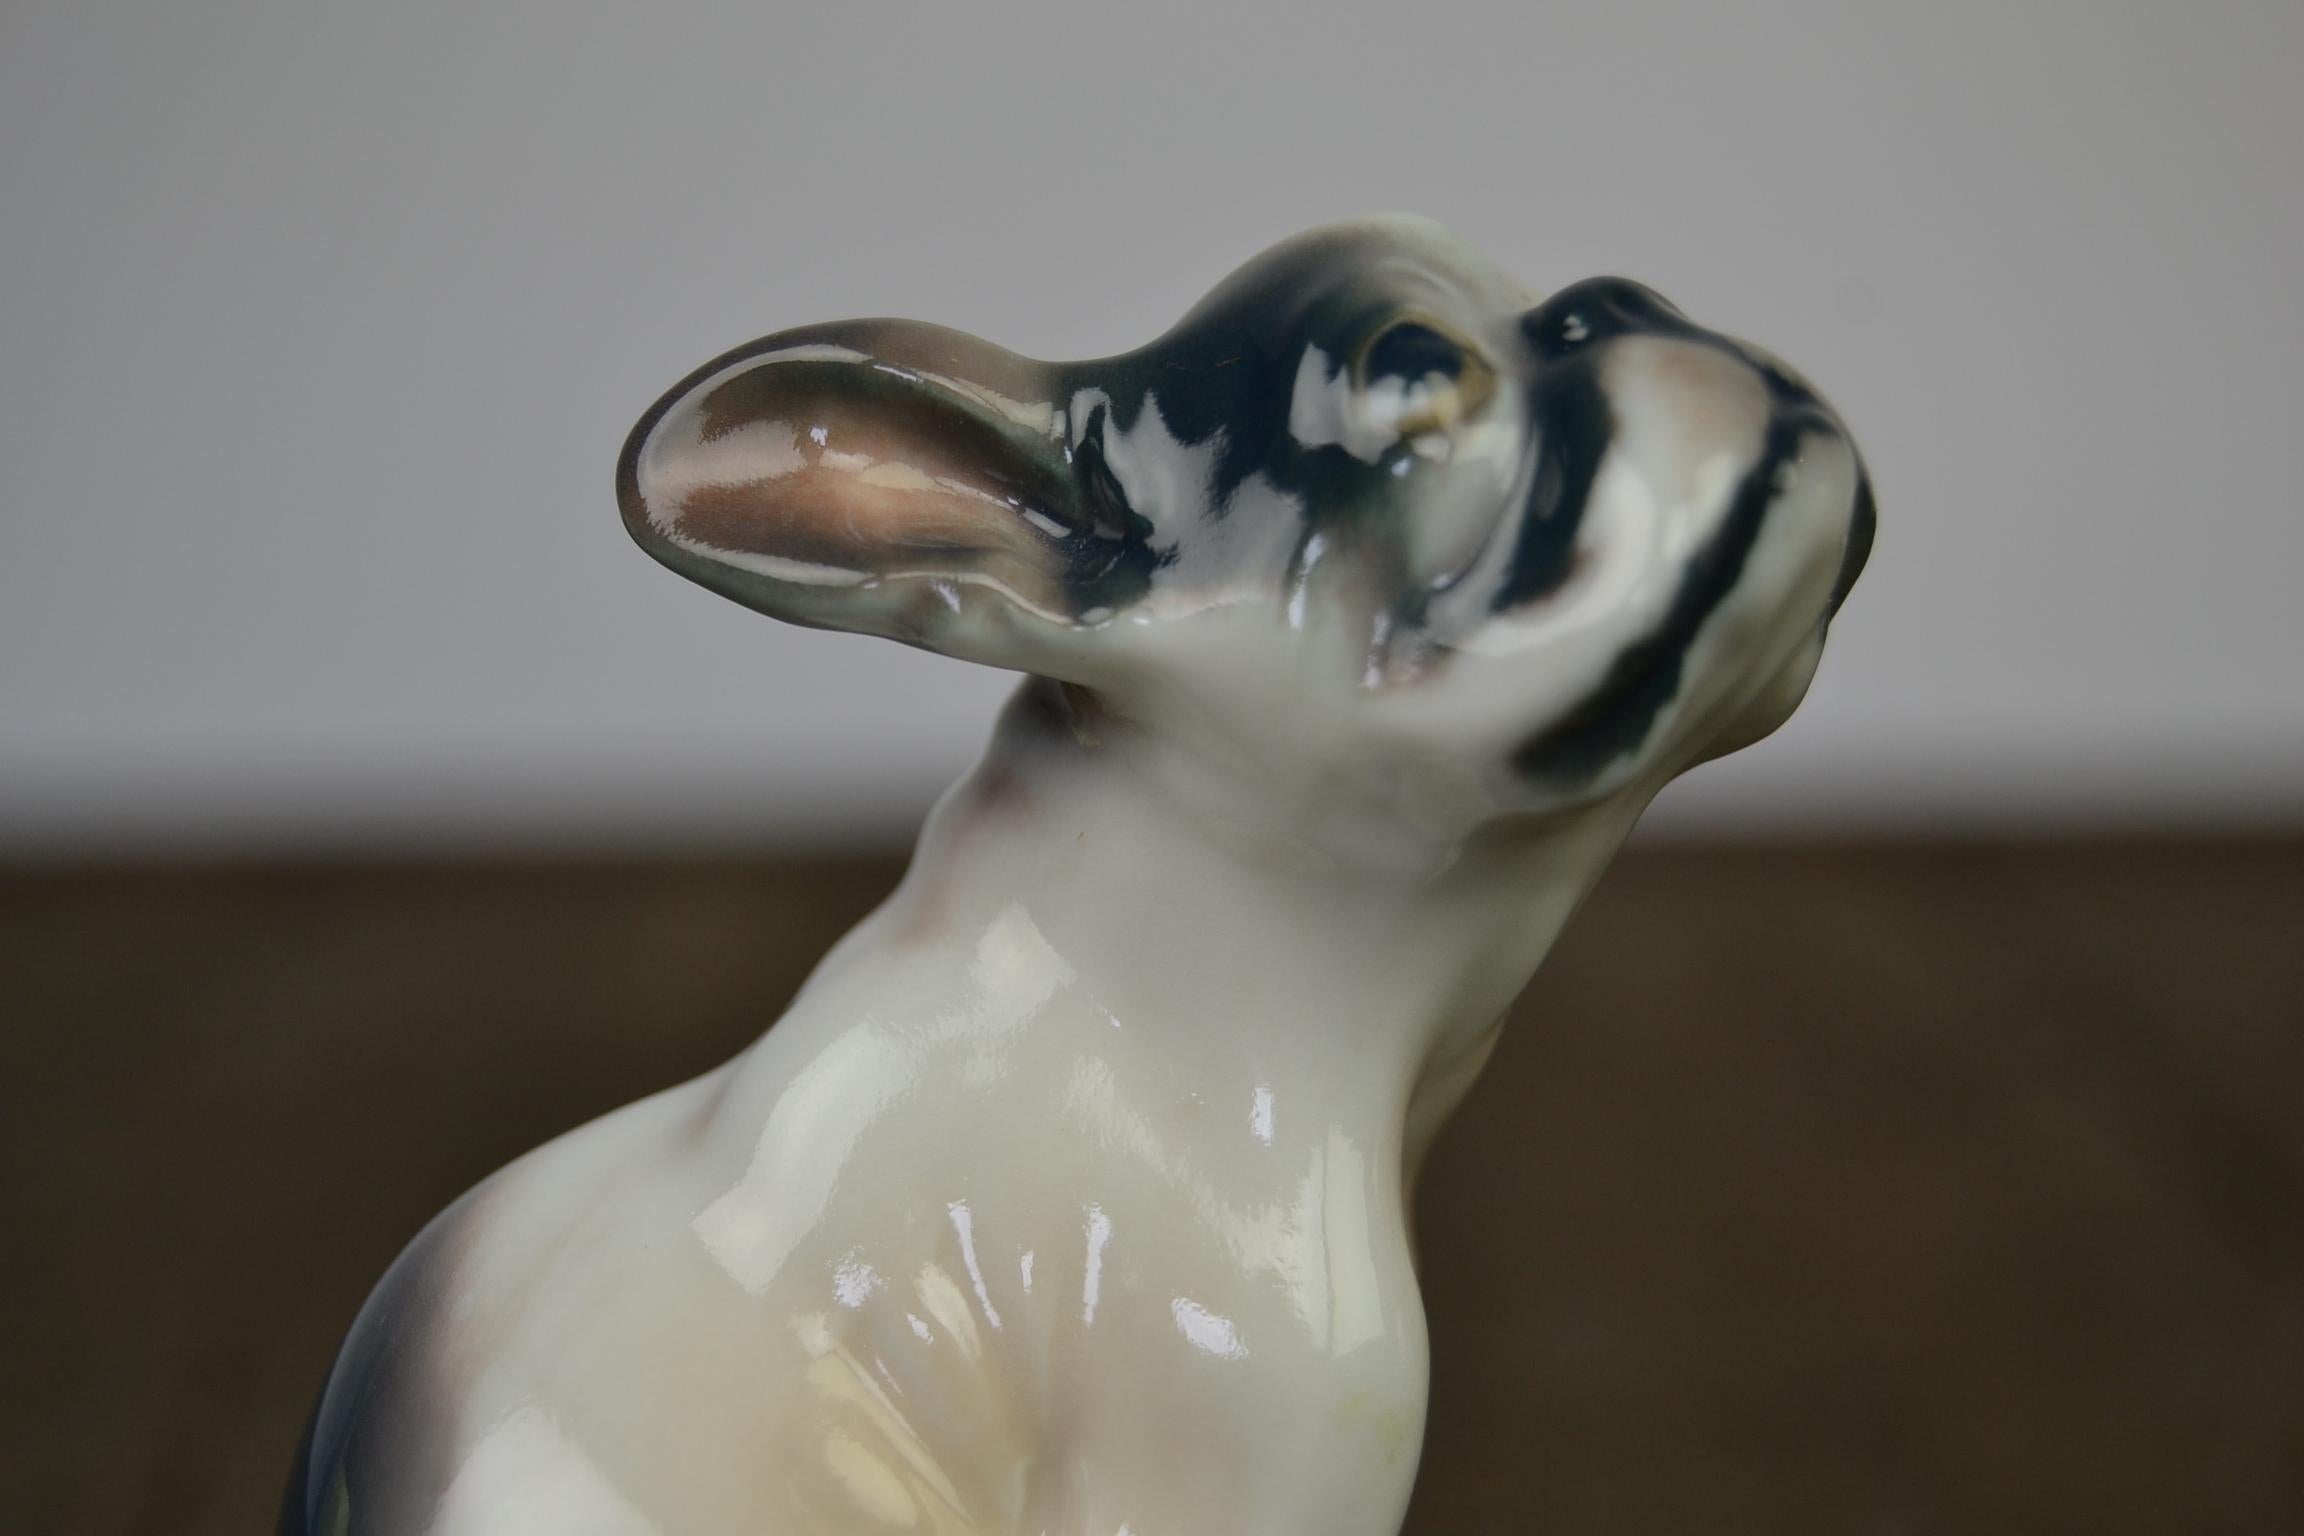 Porcelain bulldog puppy sculpture by Dahl Jensen, Denmark.
This high quality porcelain dog figurine with glazed painting dates
from the 1930s.
It was designed by the Danish Sculptor Dahl Jensen for Copenhagen Denmark Porcelain and has a Porcelain